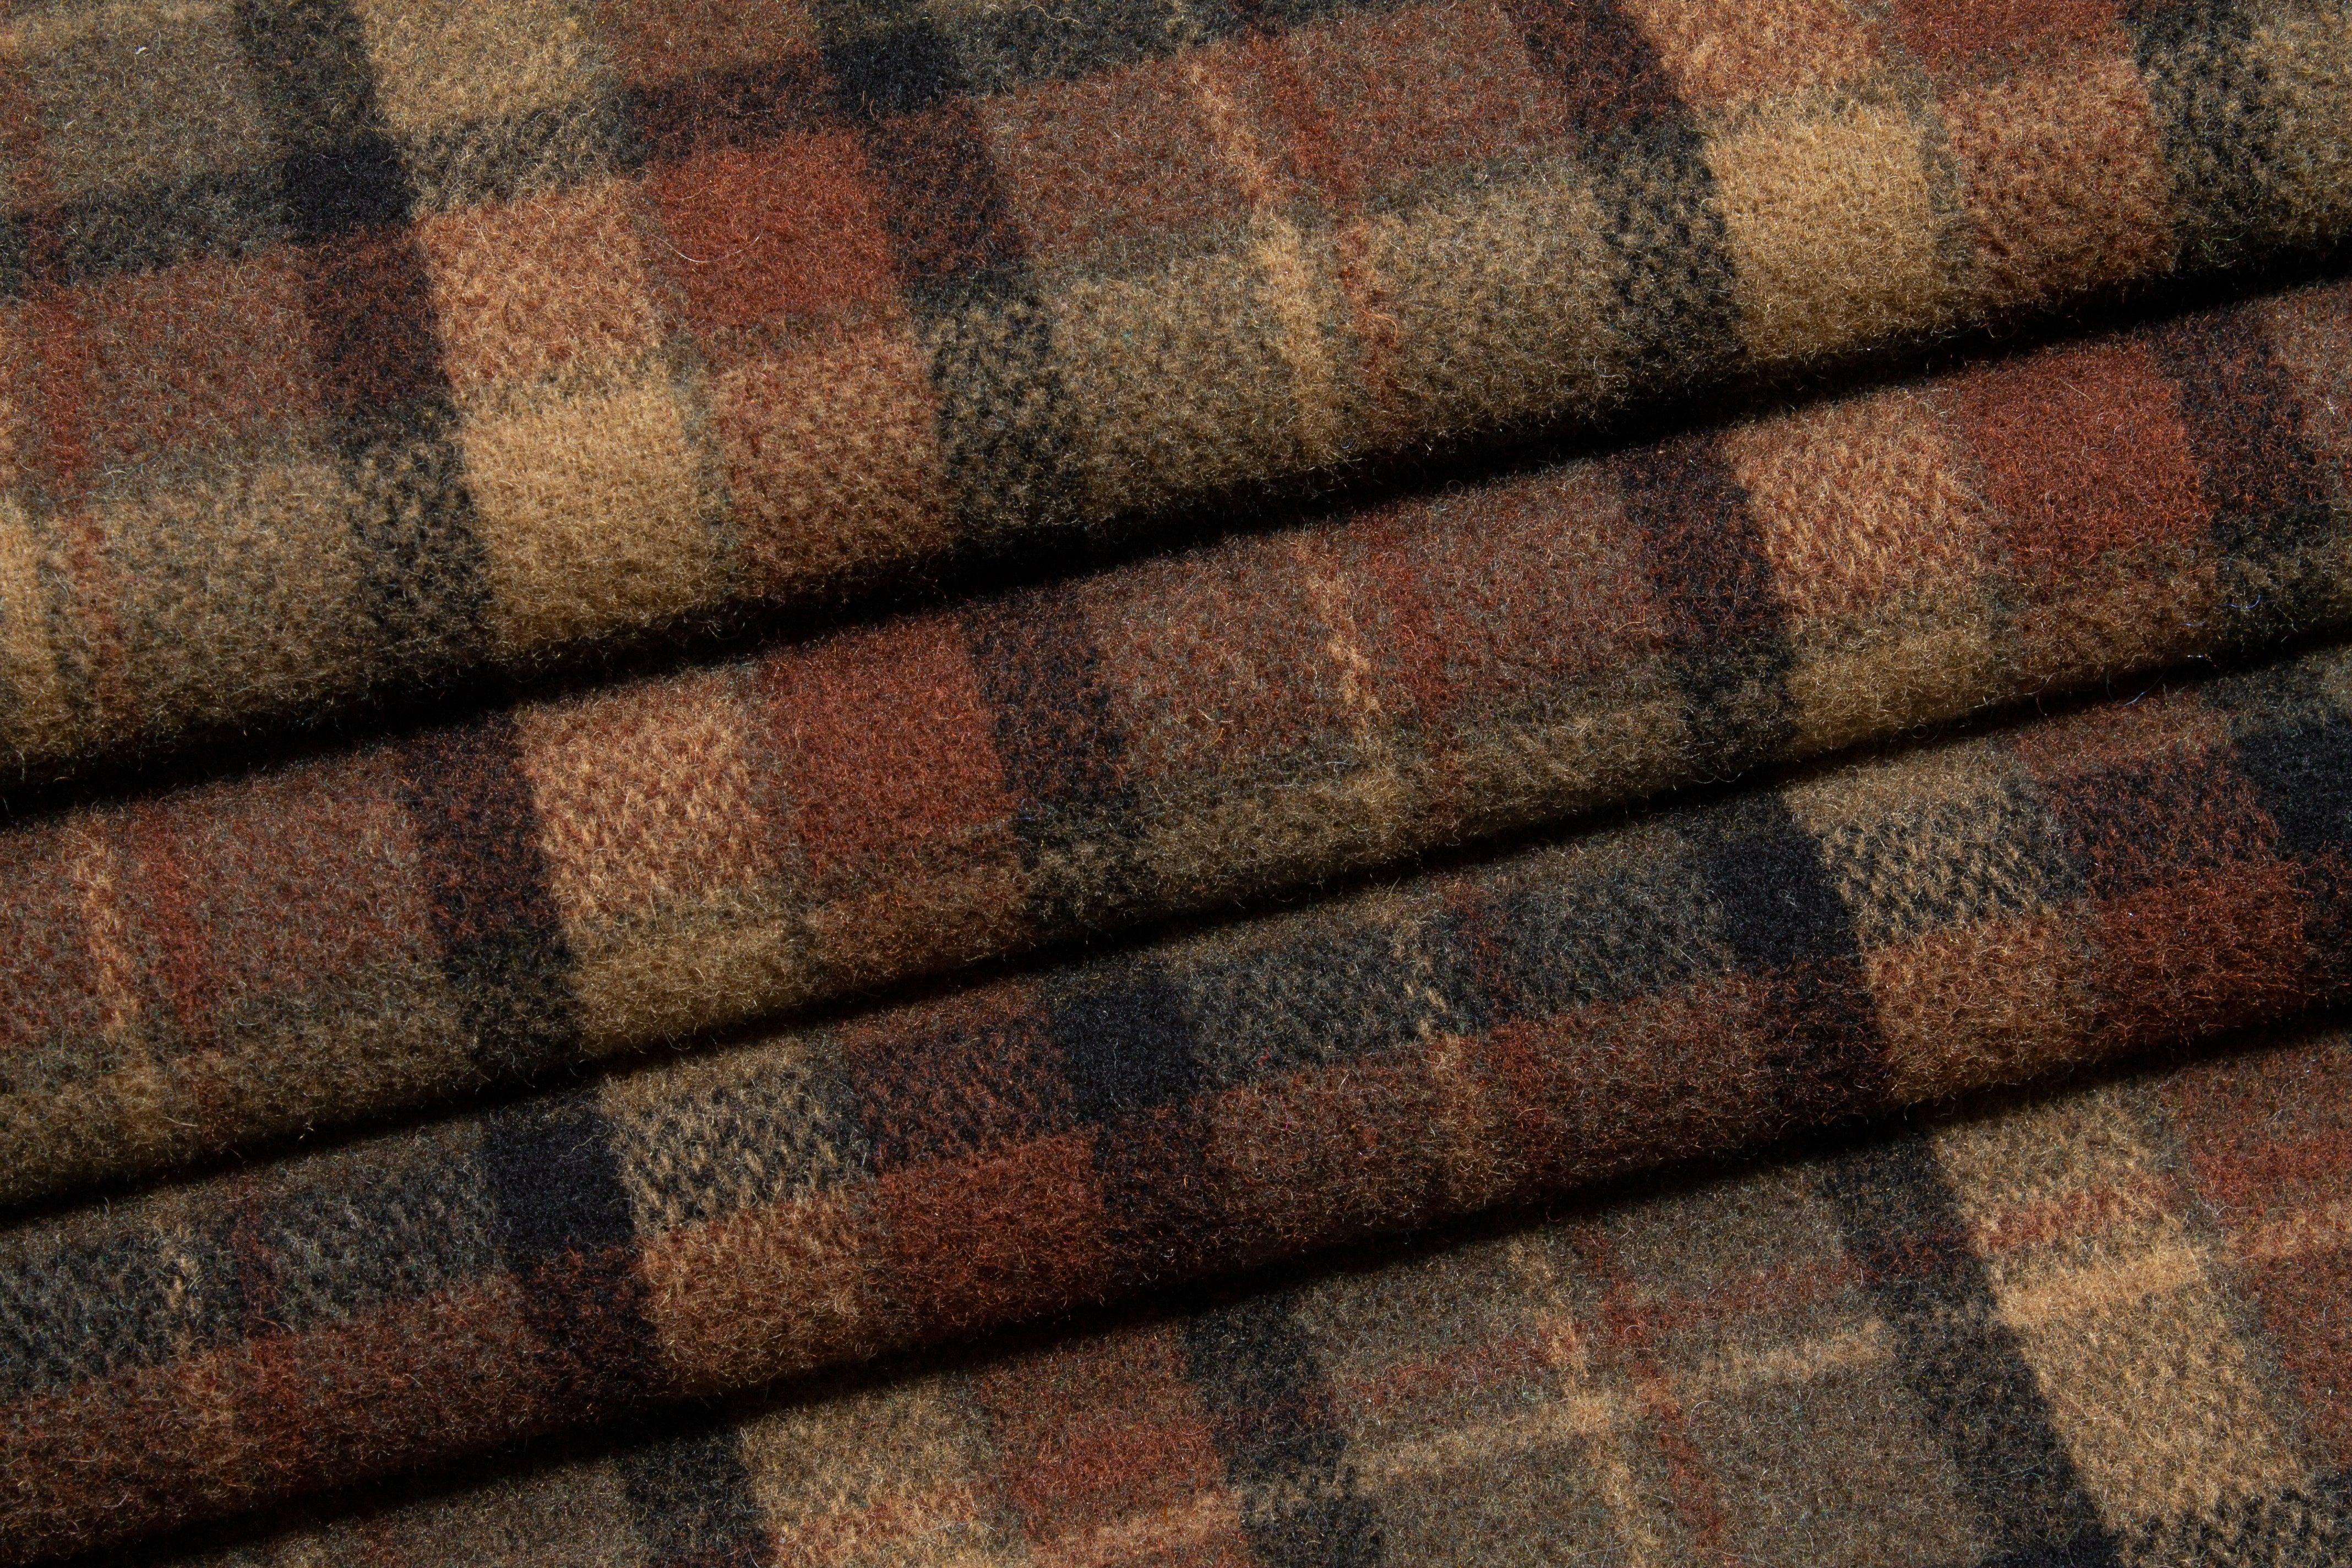 Italian Solid 2-Ply Double Sided Light Wool Flannel - Brown